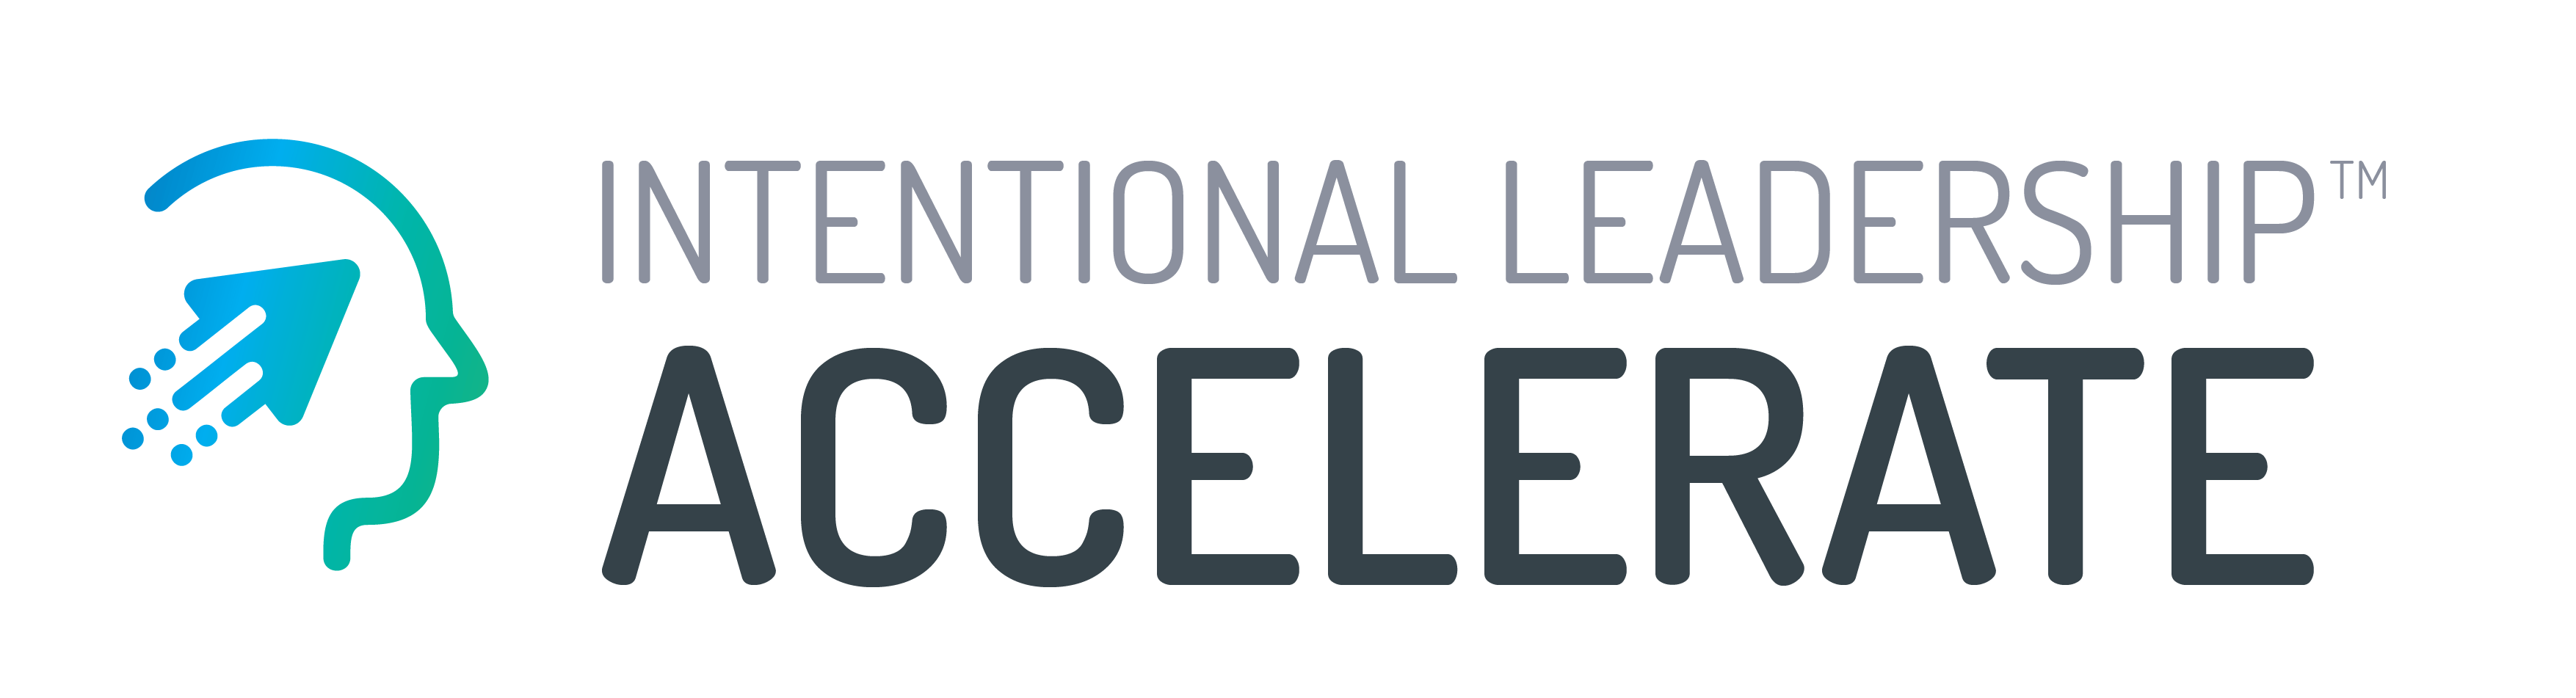 intentional leadership accelerate